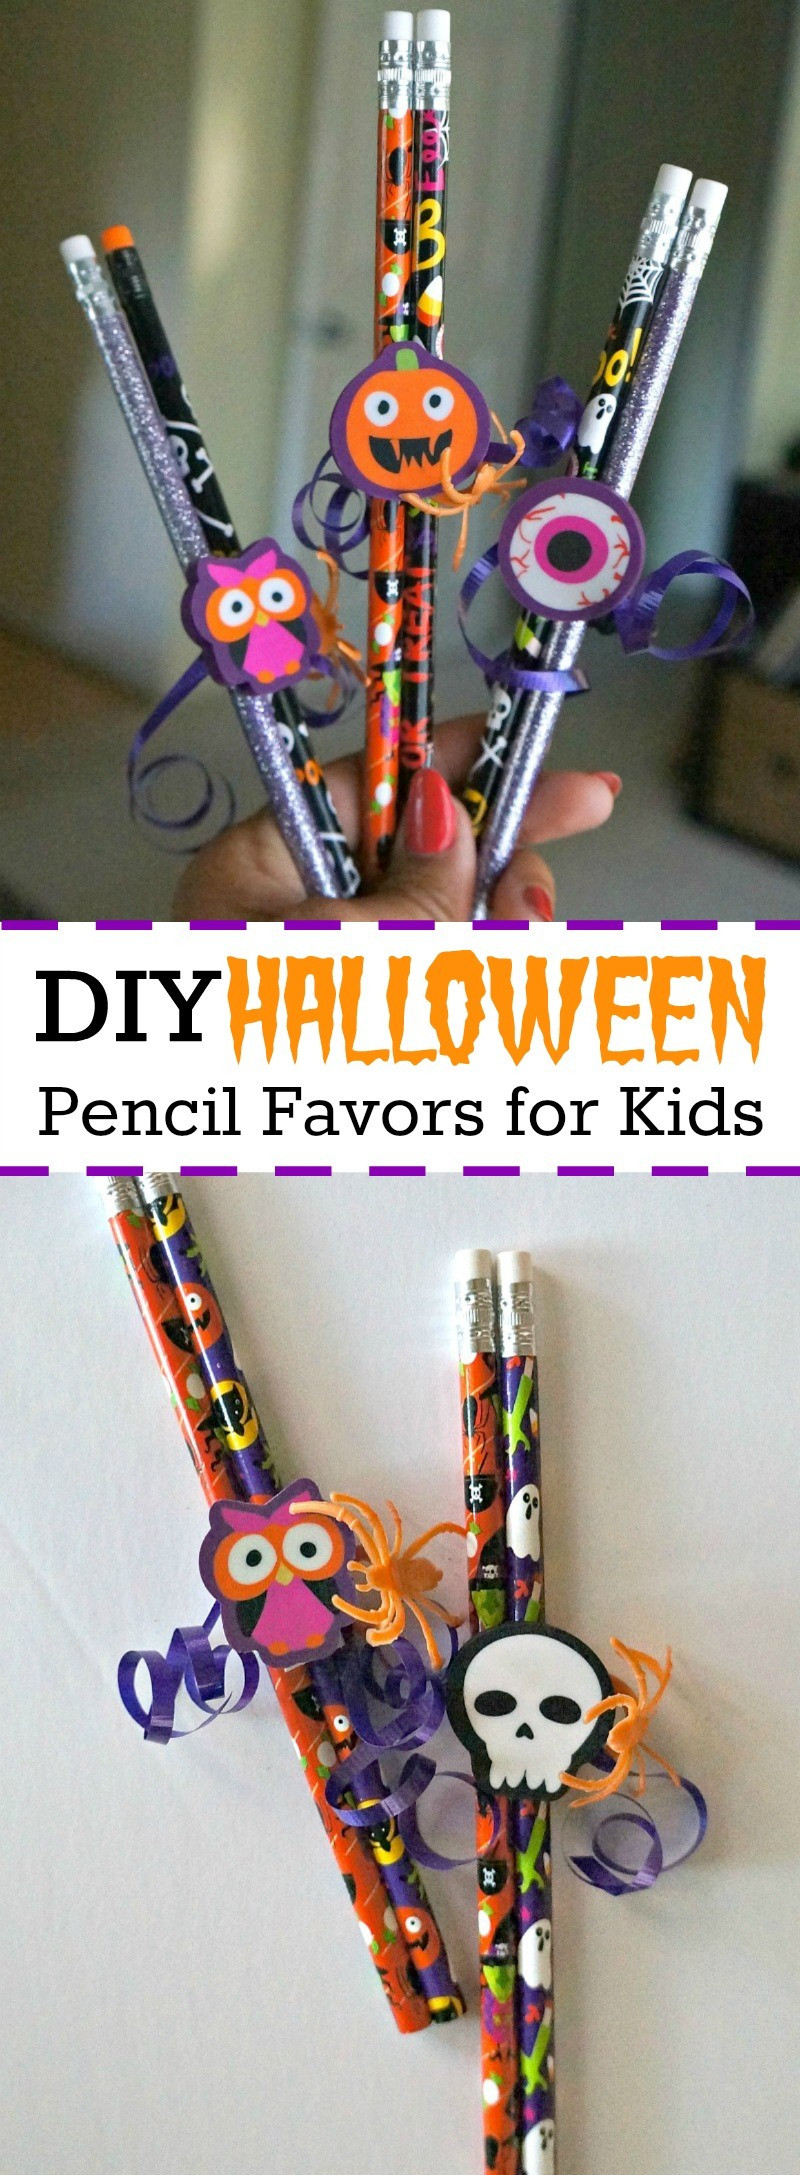 DIY Party Favors For Kids
 DIY Halloween Pencil Party Favors for Kids No Candy